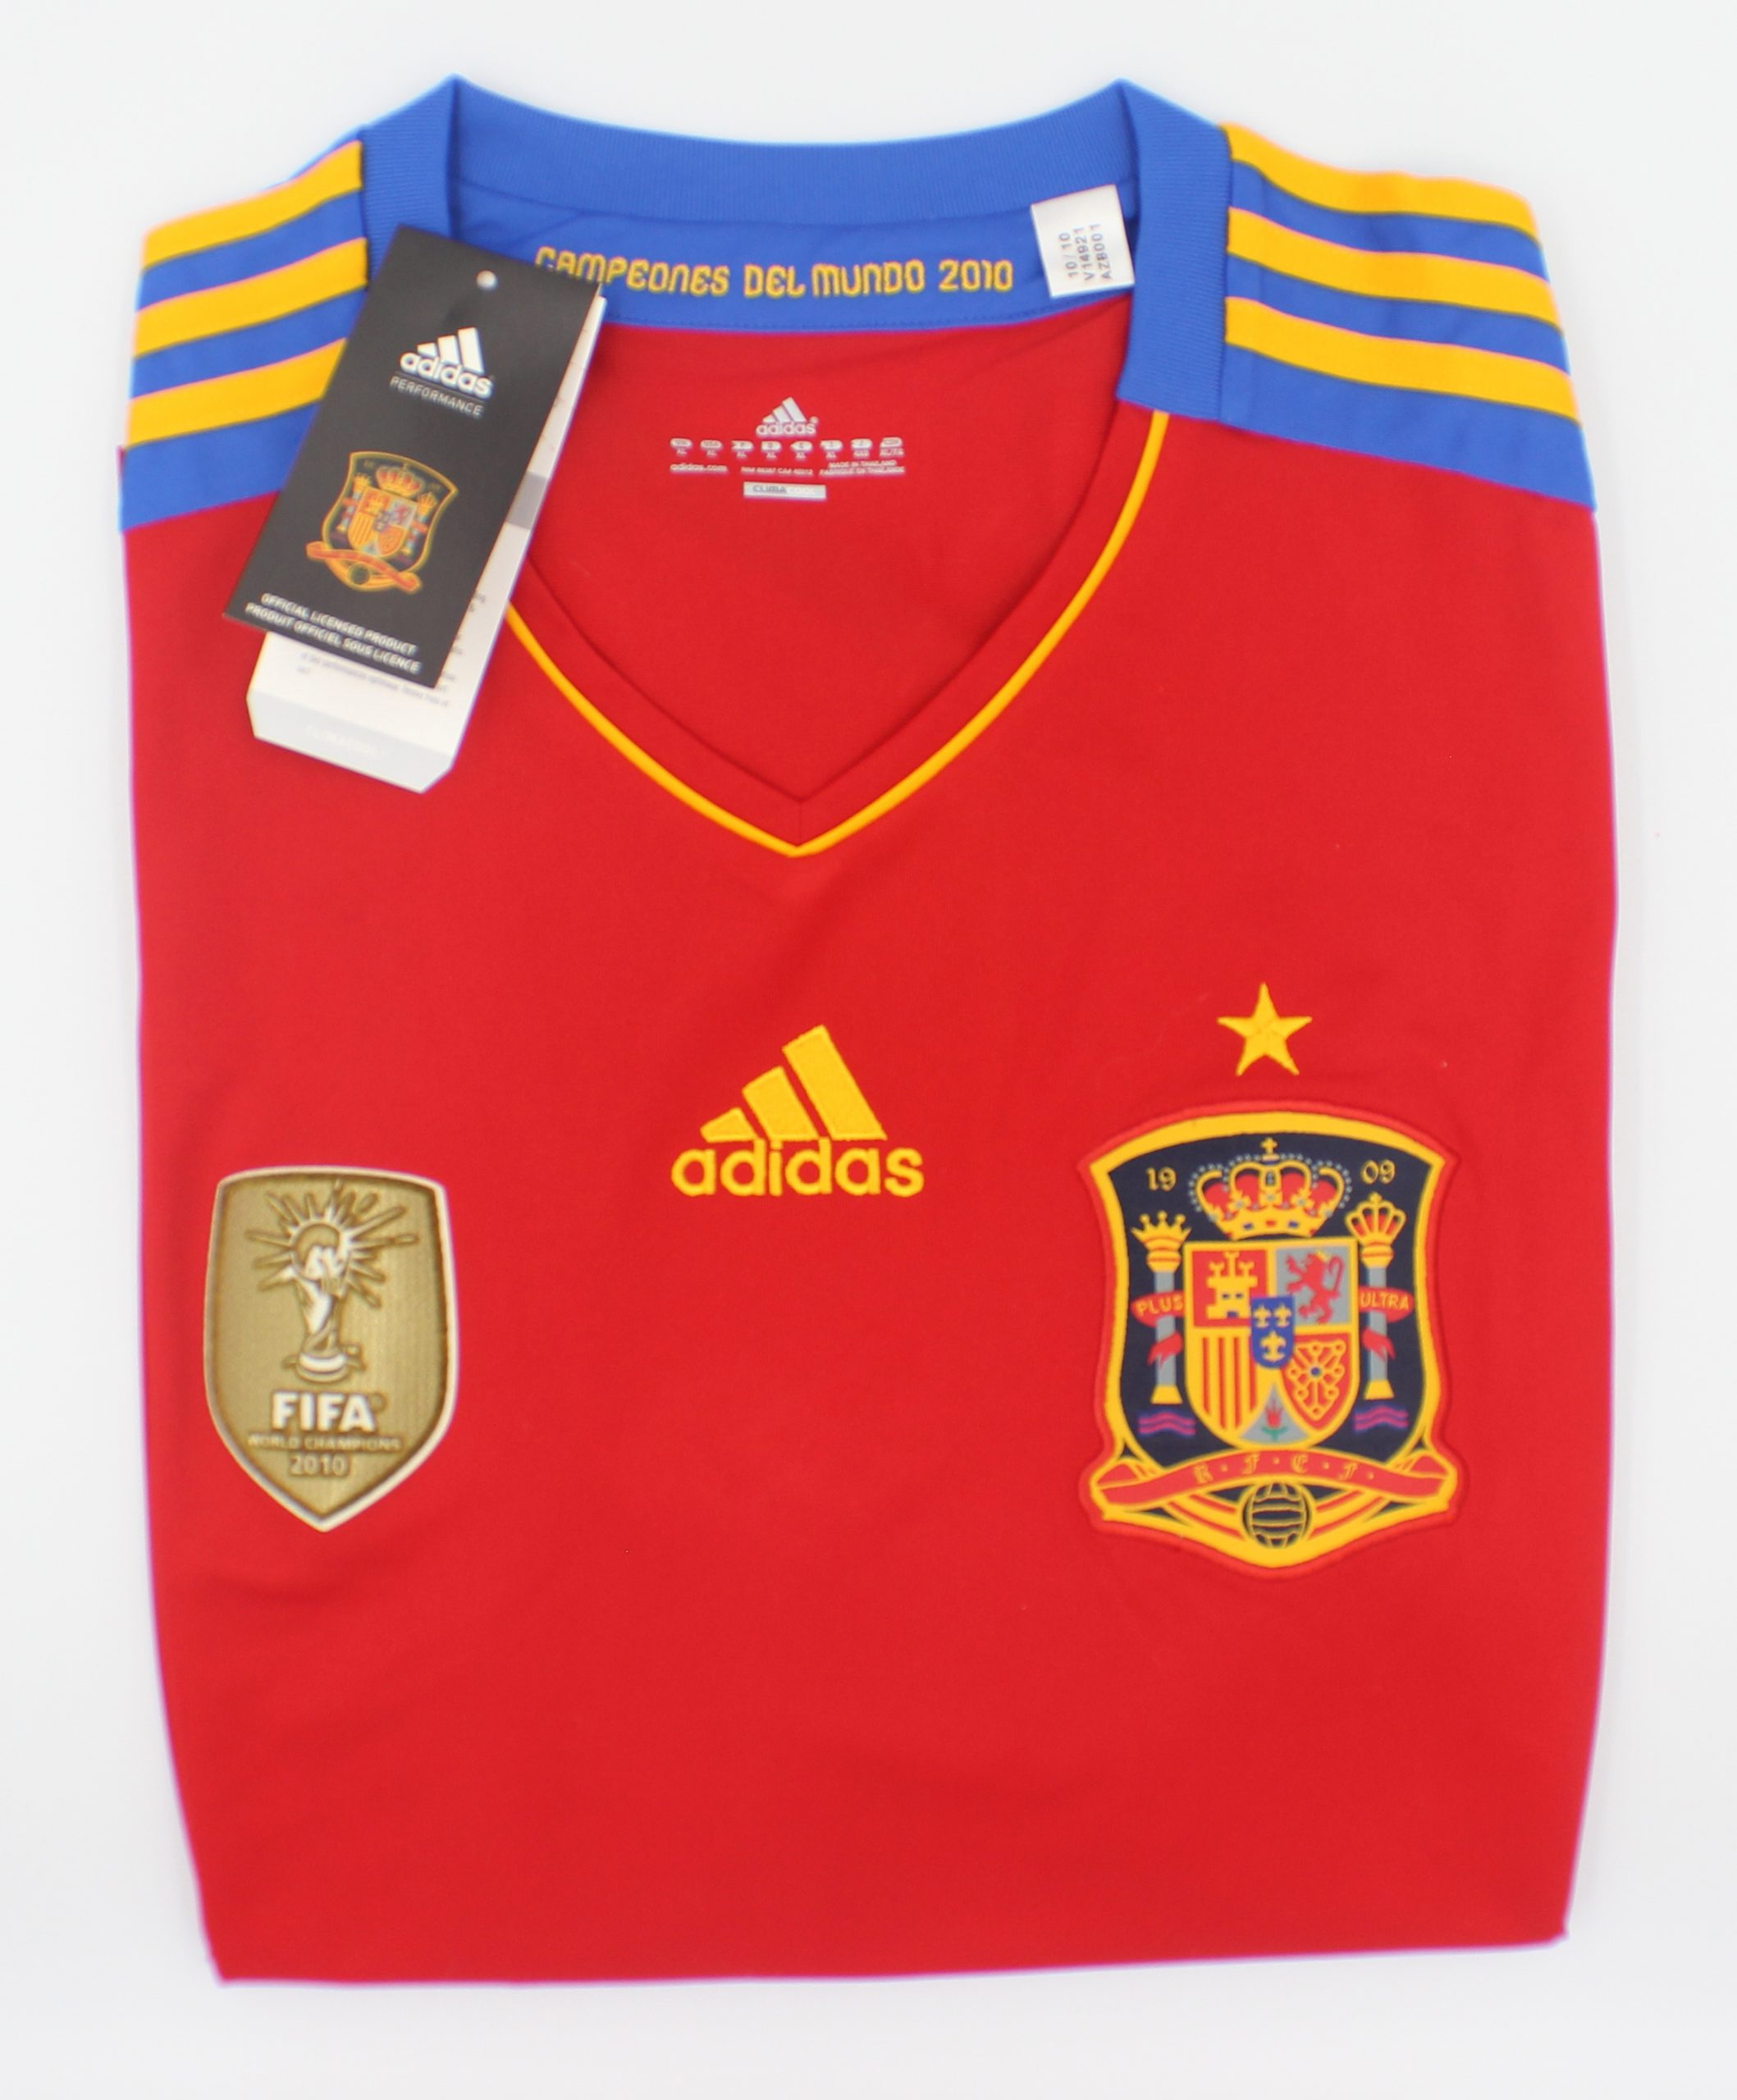 RETRO 2010 FIFA_WORLD CUP FINAL JERSEYS WITH STAR SPAIN HOME JERSEYS 